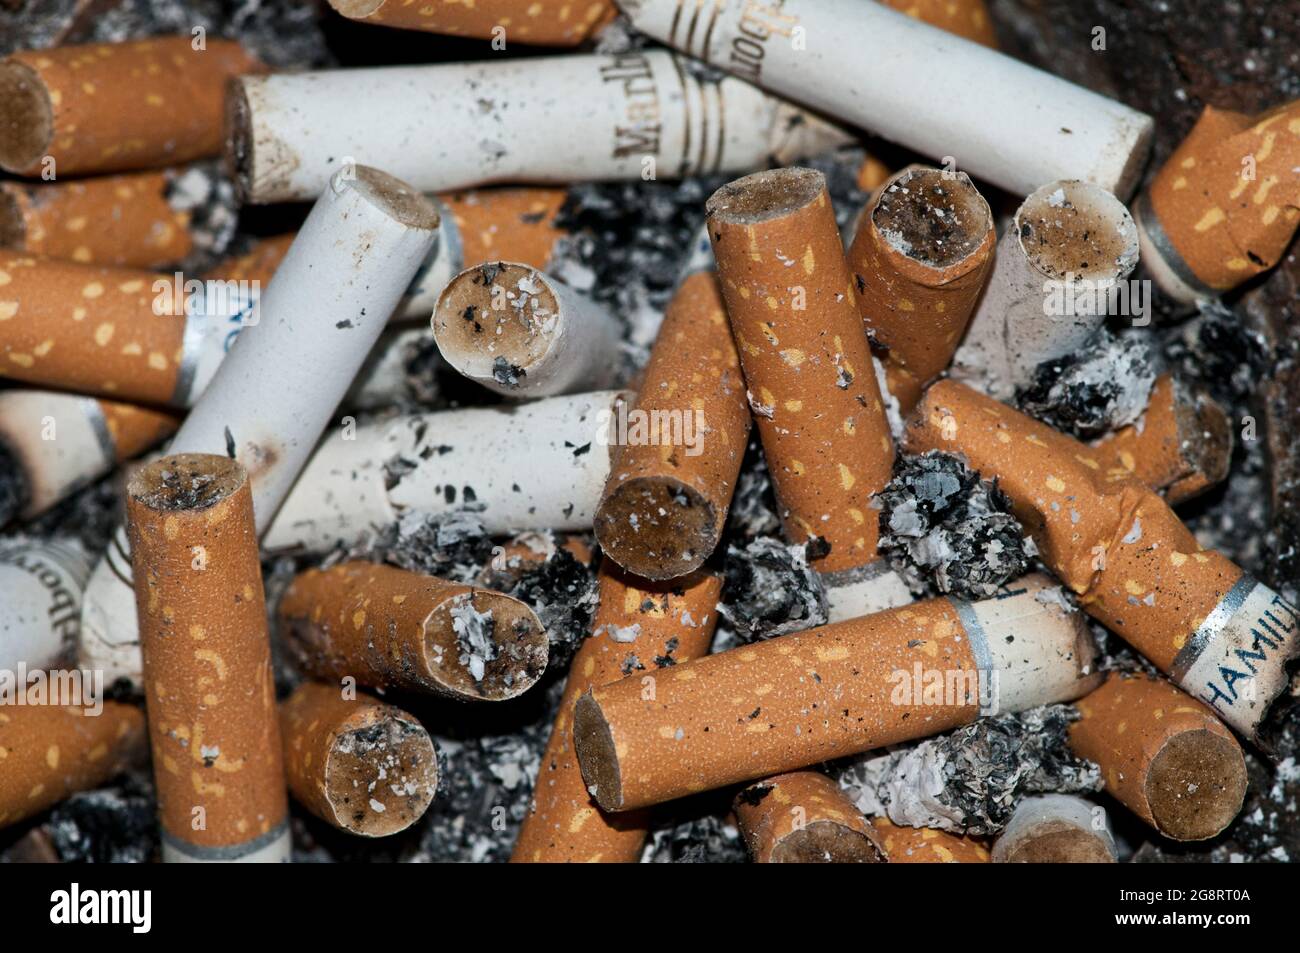 Cigarette butts in an ashtray Stock Photo